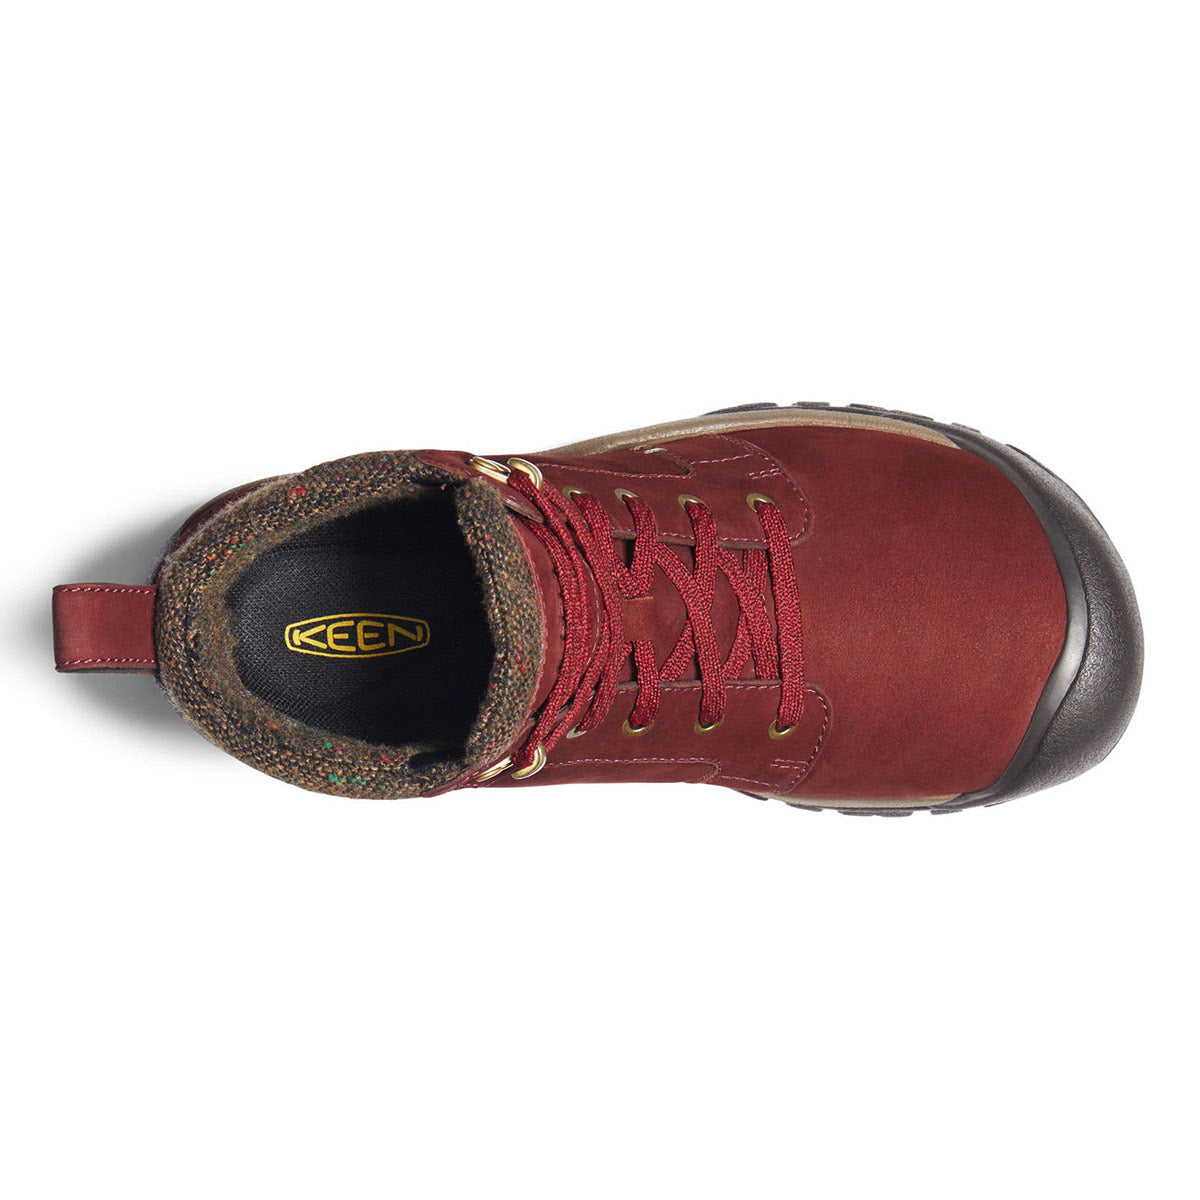 Top-down view of a single red Keen KACI II Winter Mid WP Andorra/Canteen hiking boot featuring KEEN.DRY waterproof technology.